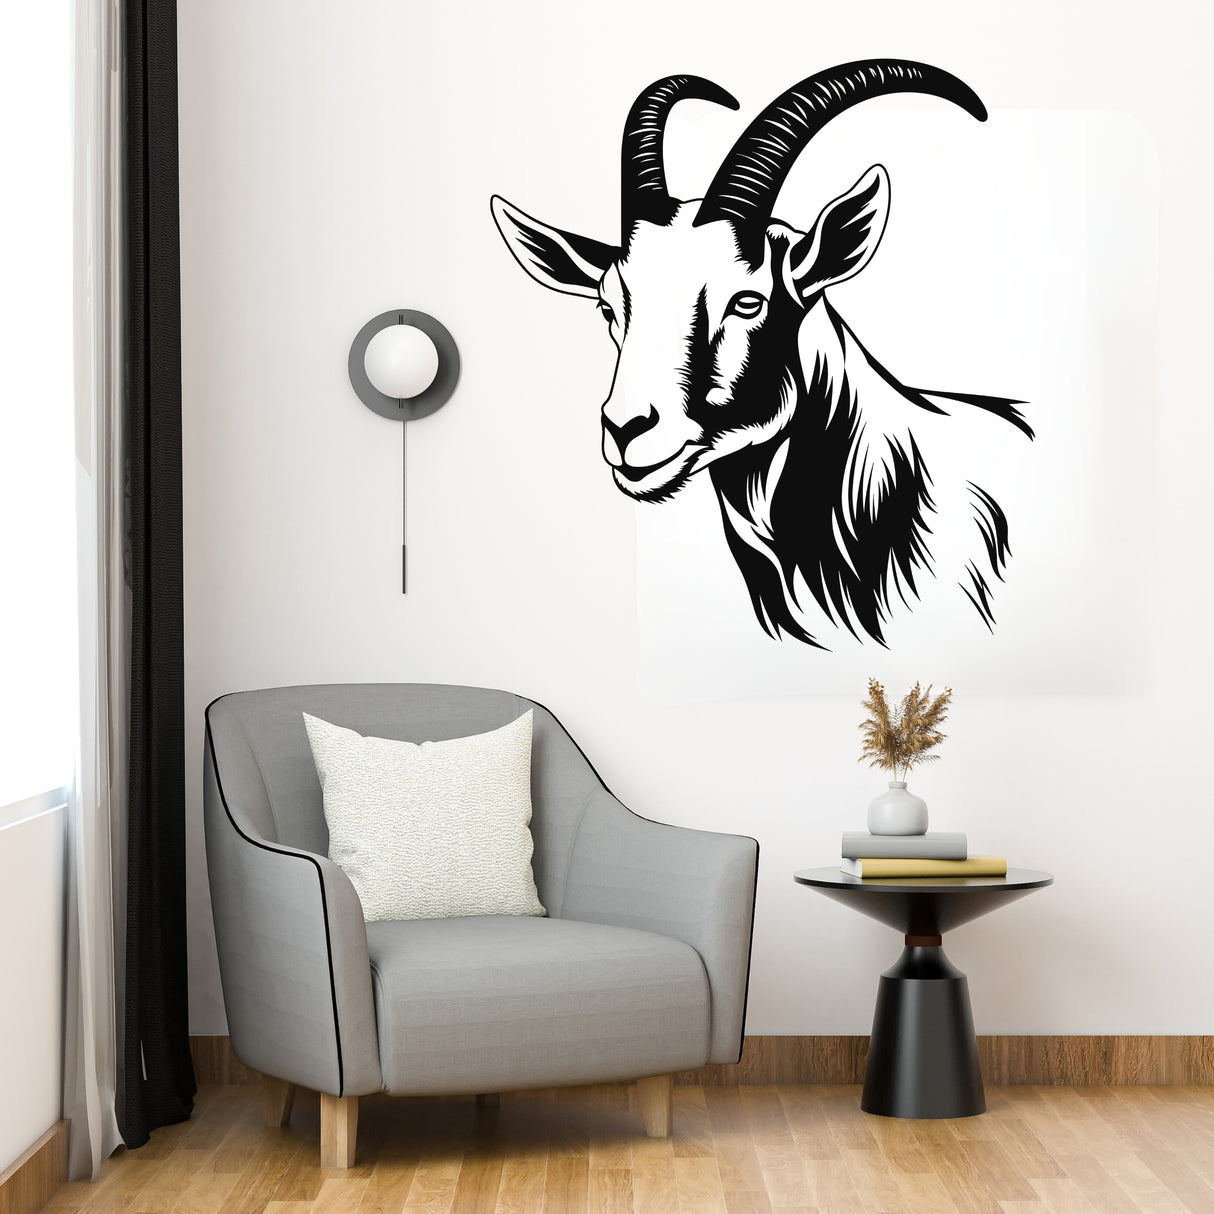 Graceful Goat Wall Decal - Bring Serenity to Your Space